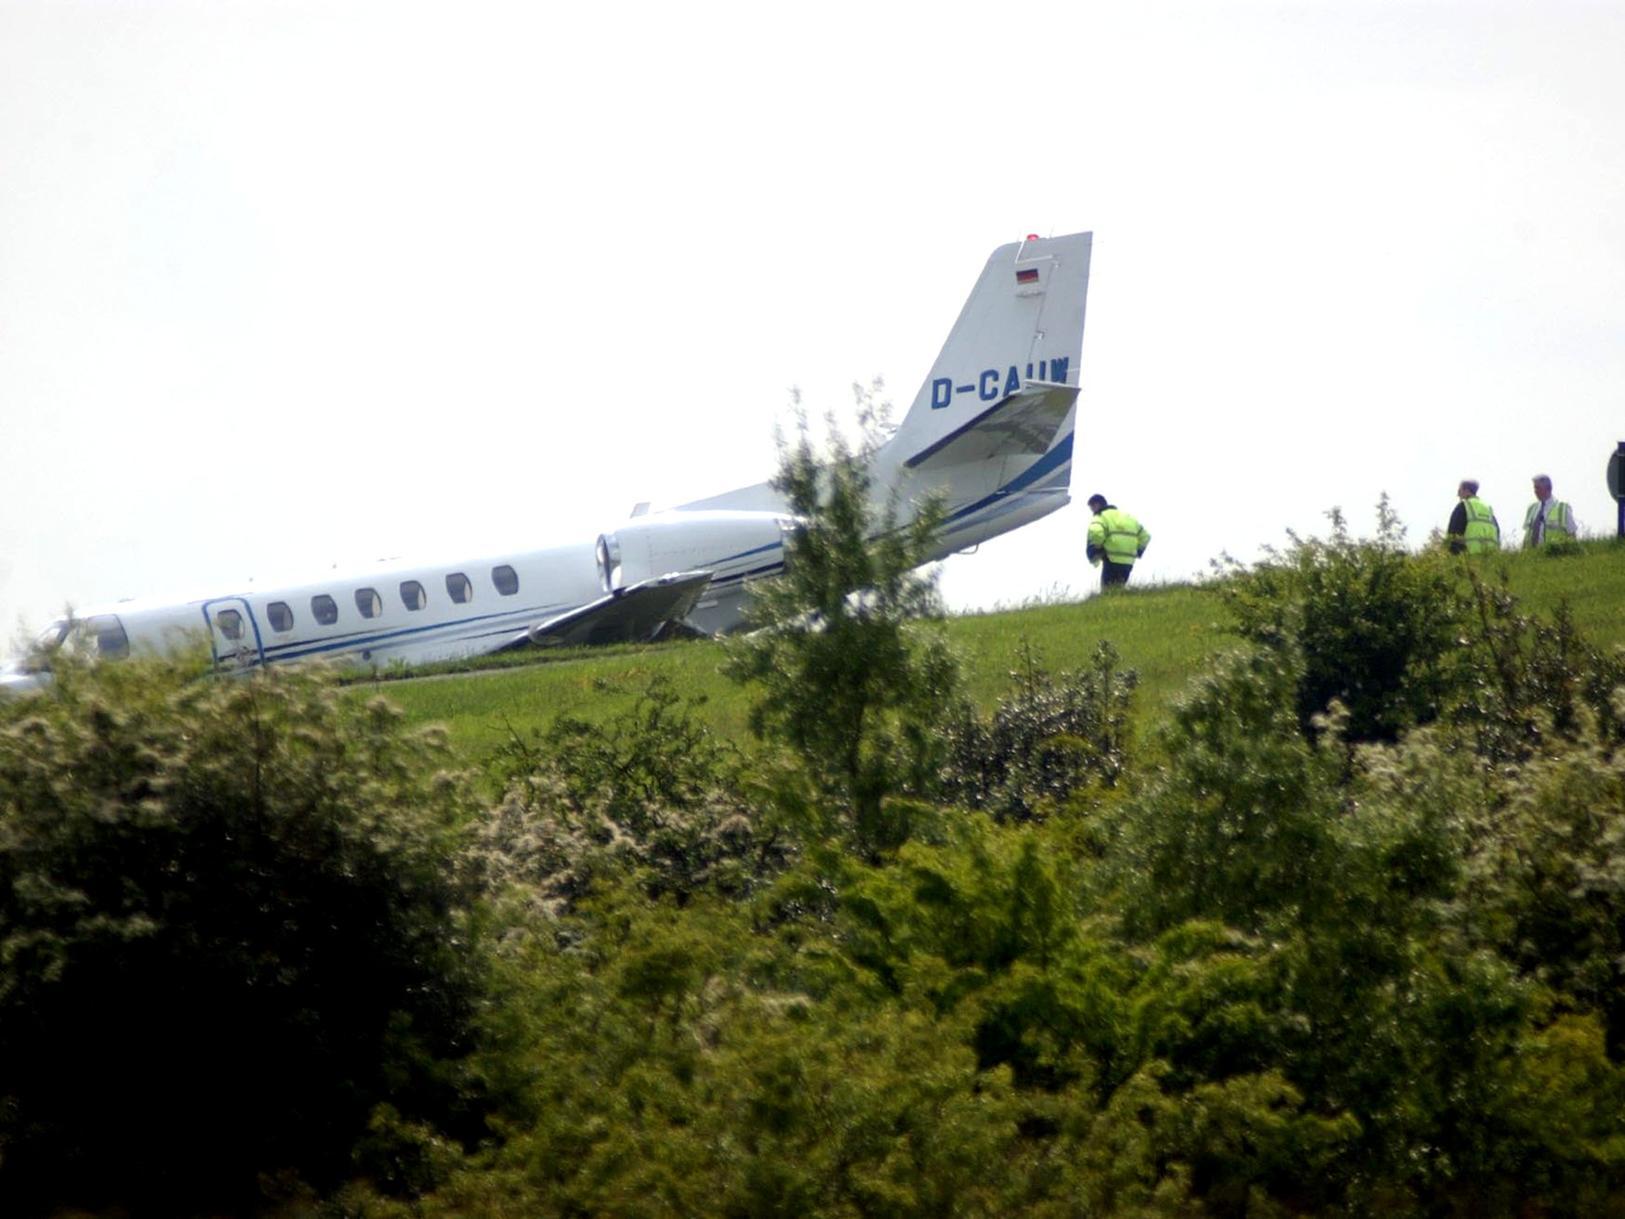 This plane over ran the runway at Leeds Bradford Airport.